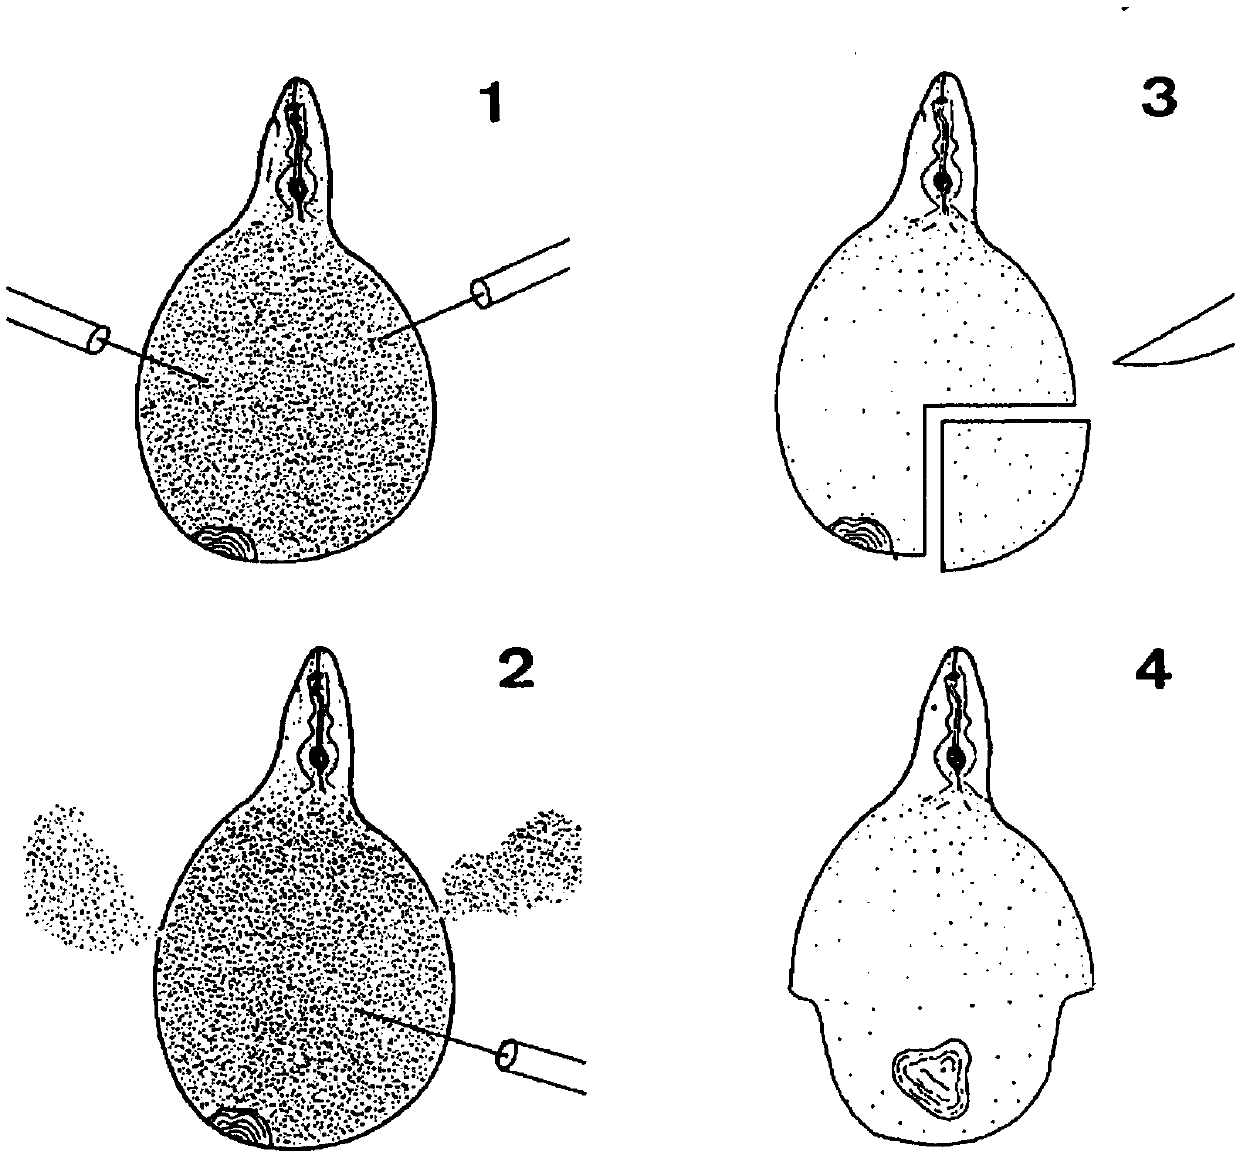 Rapid producing method for perineal pattern of root-knot nematode